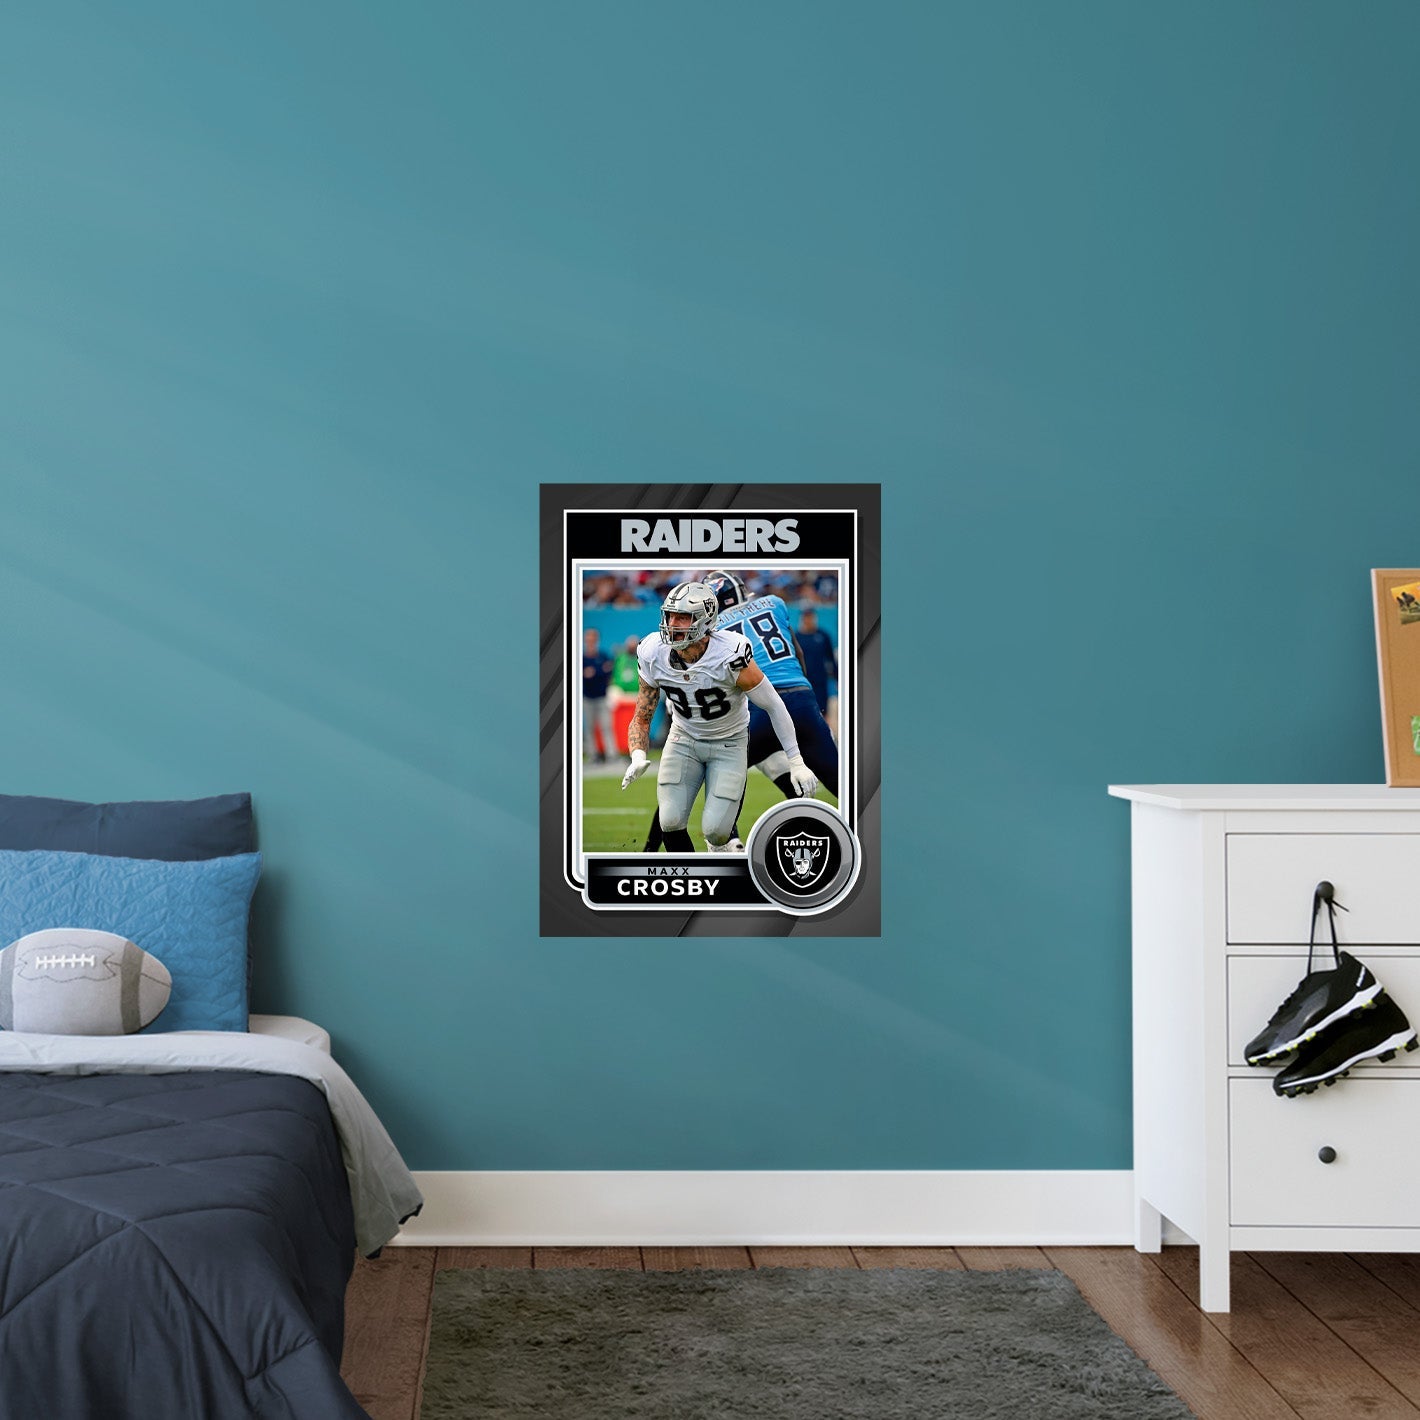 Las Vegas Raiders: Maxx Crosby Poster - Officially Licensed NFL Removable Adhesive Decal